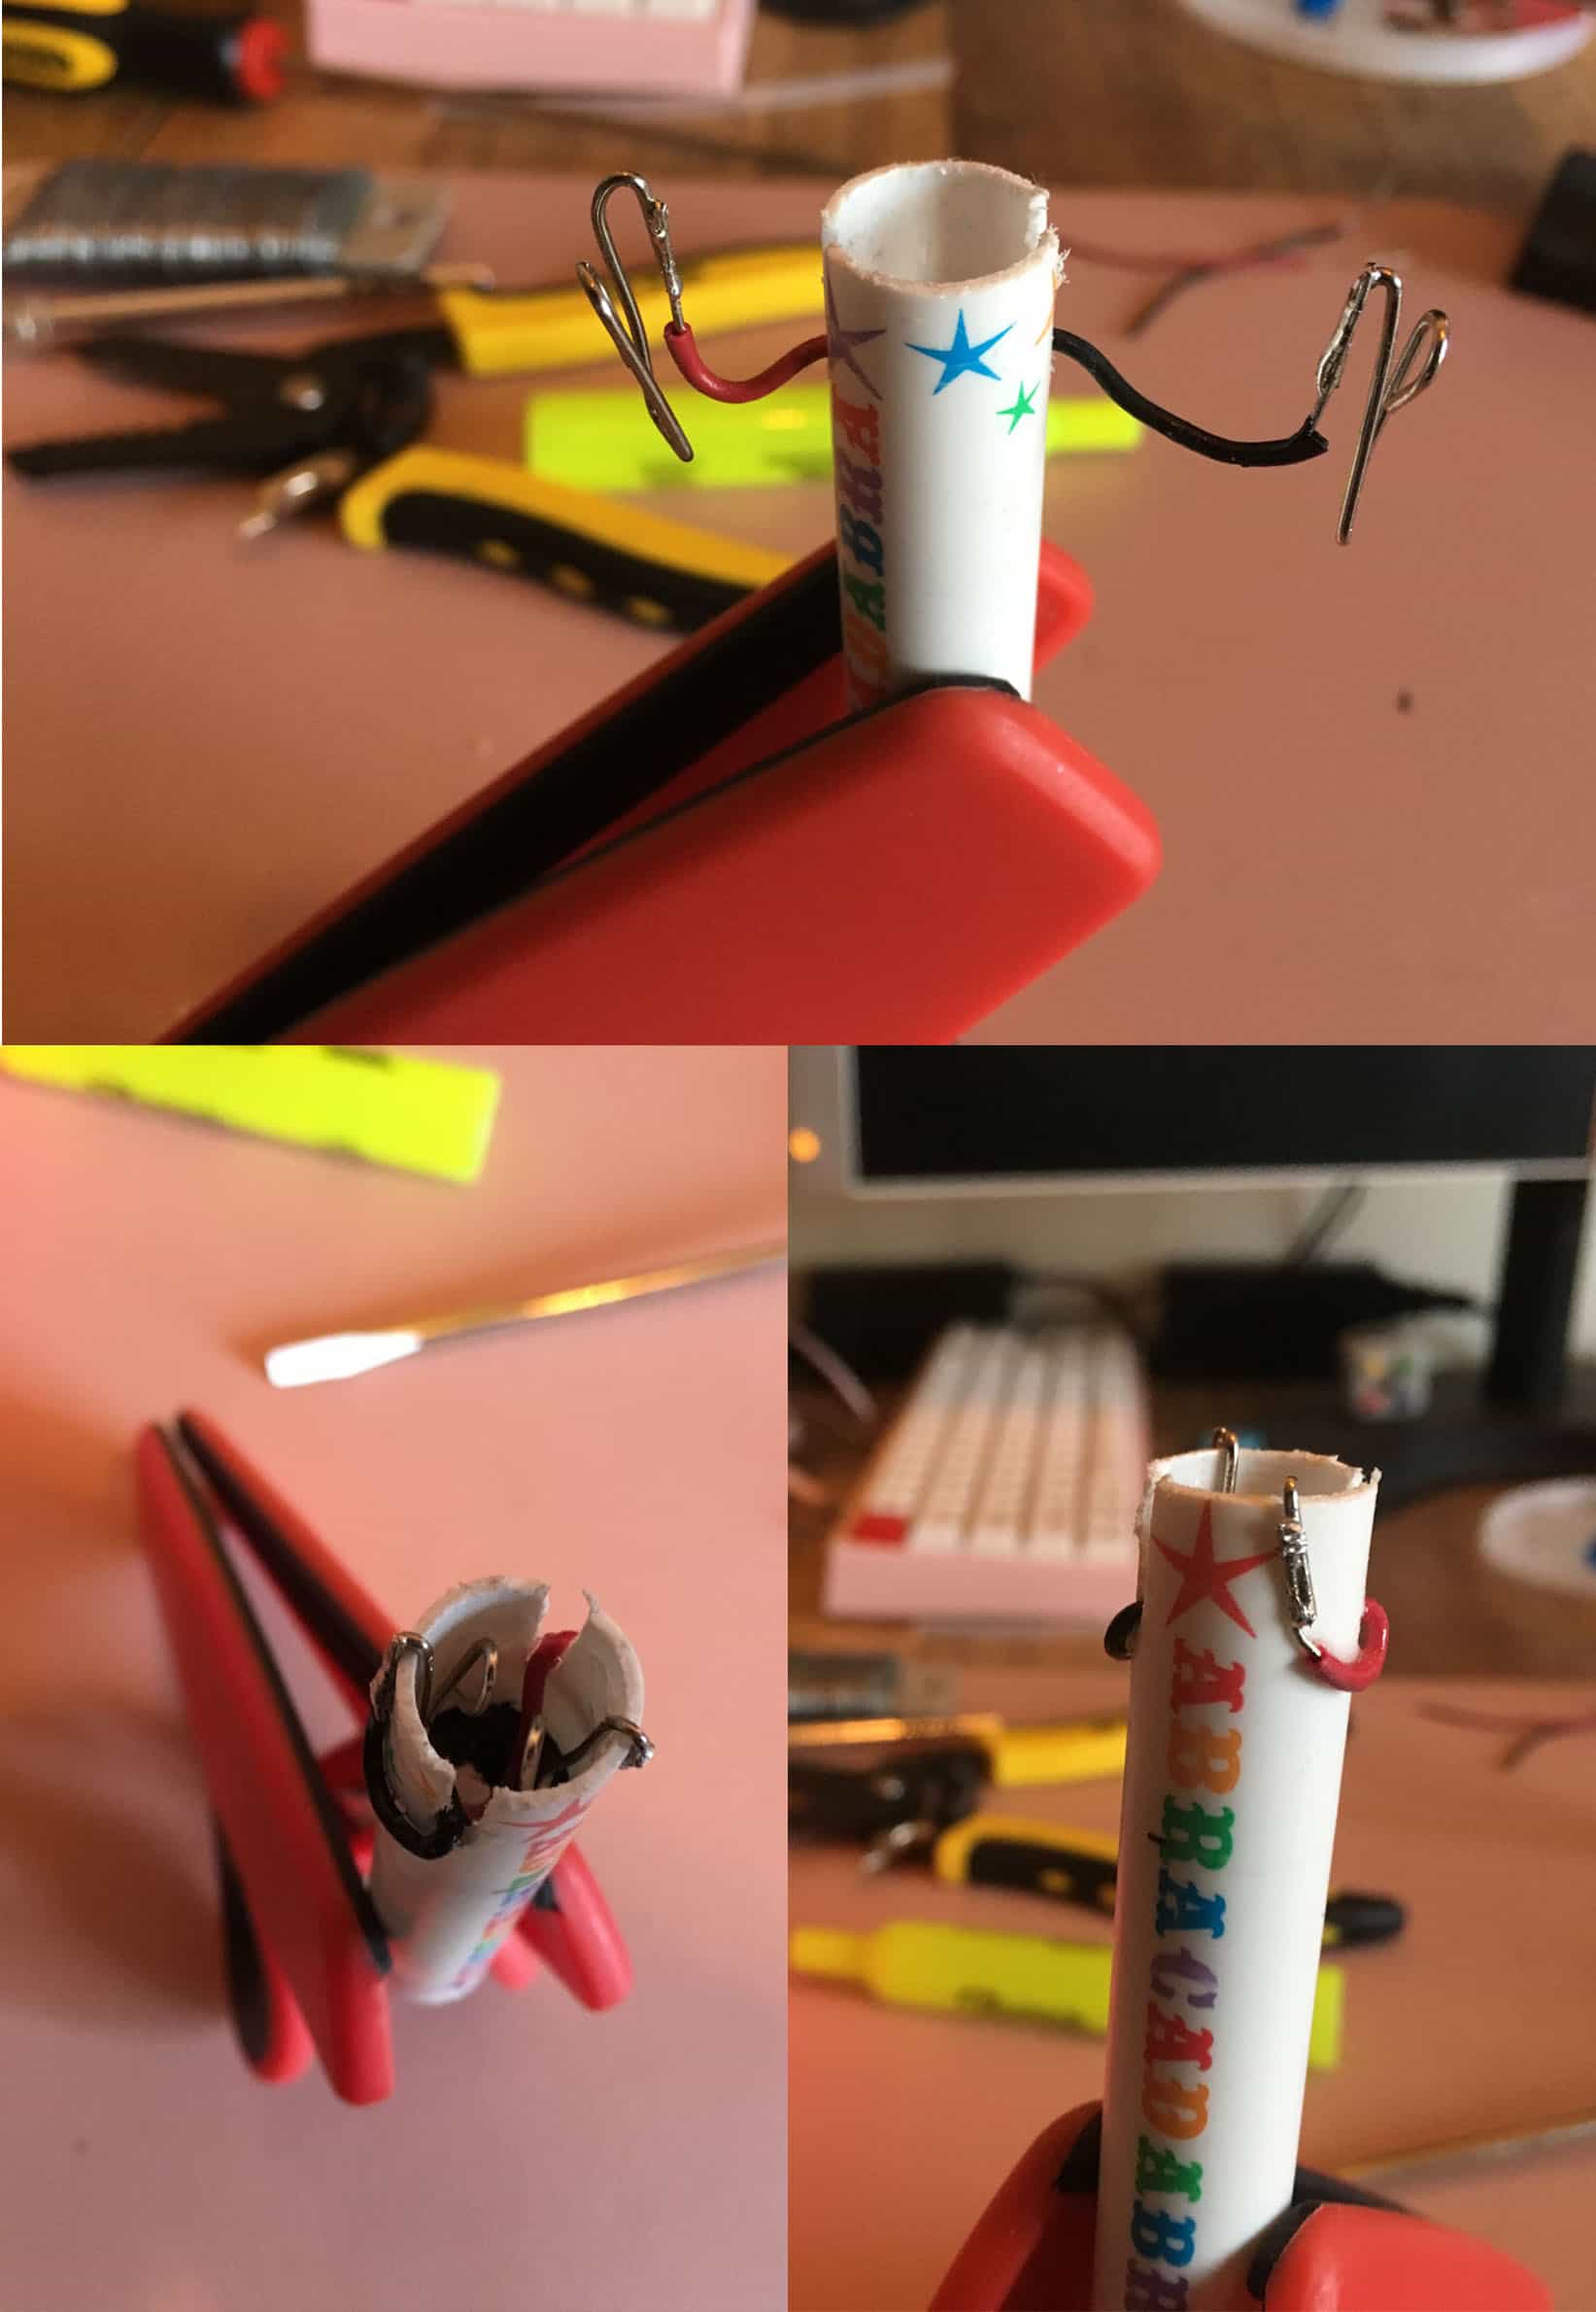 3 images. One is of the wires soldered to the paperclips. The other two are different angles showing placement in the marker tube.